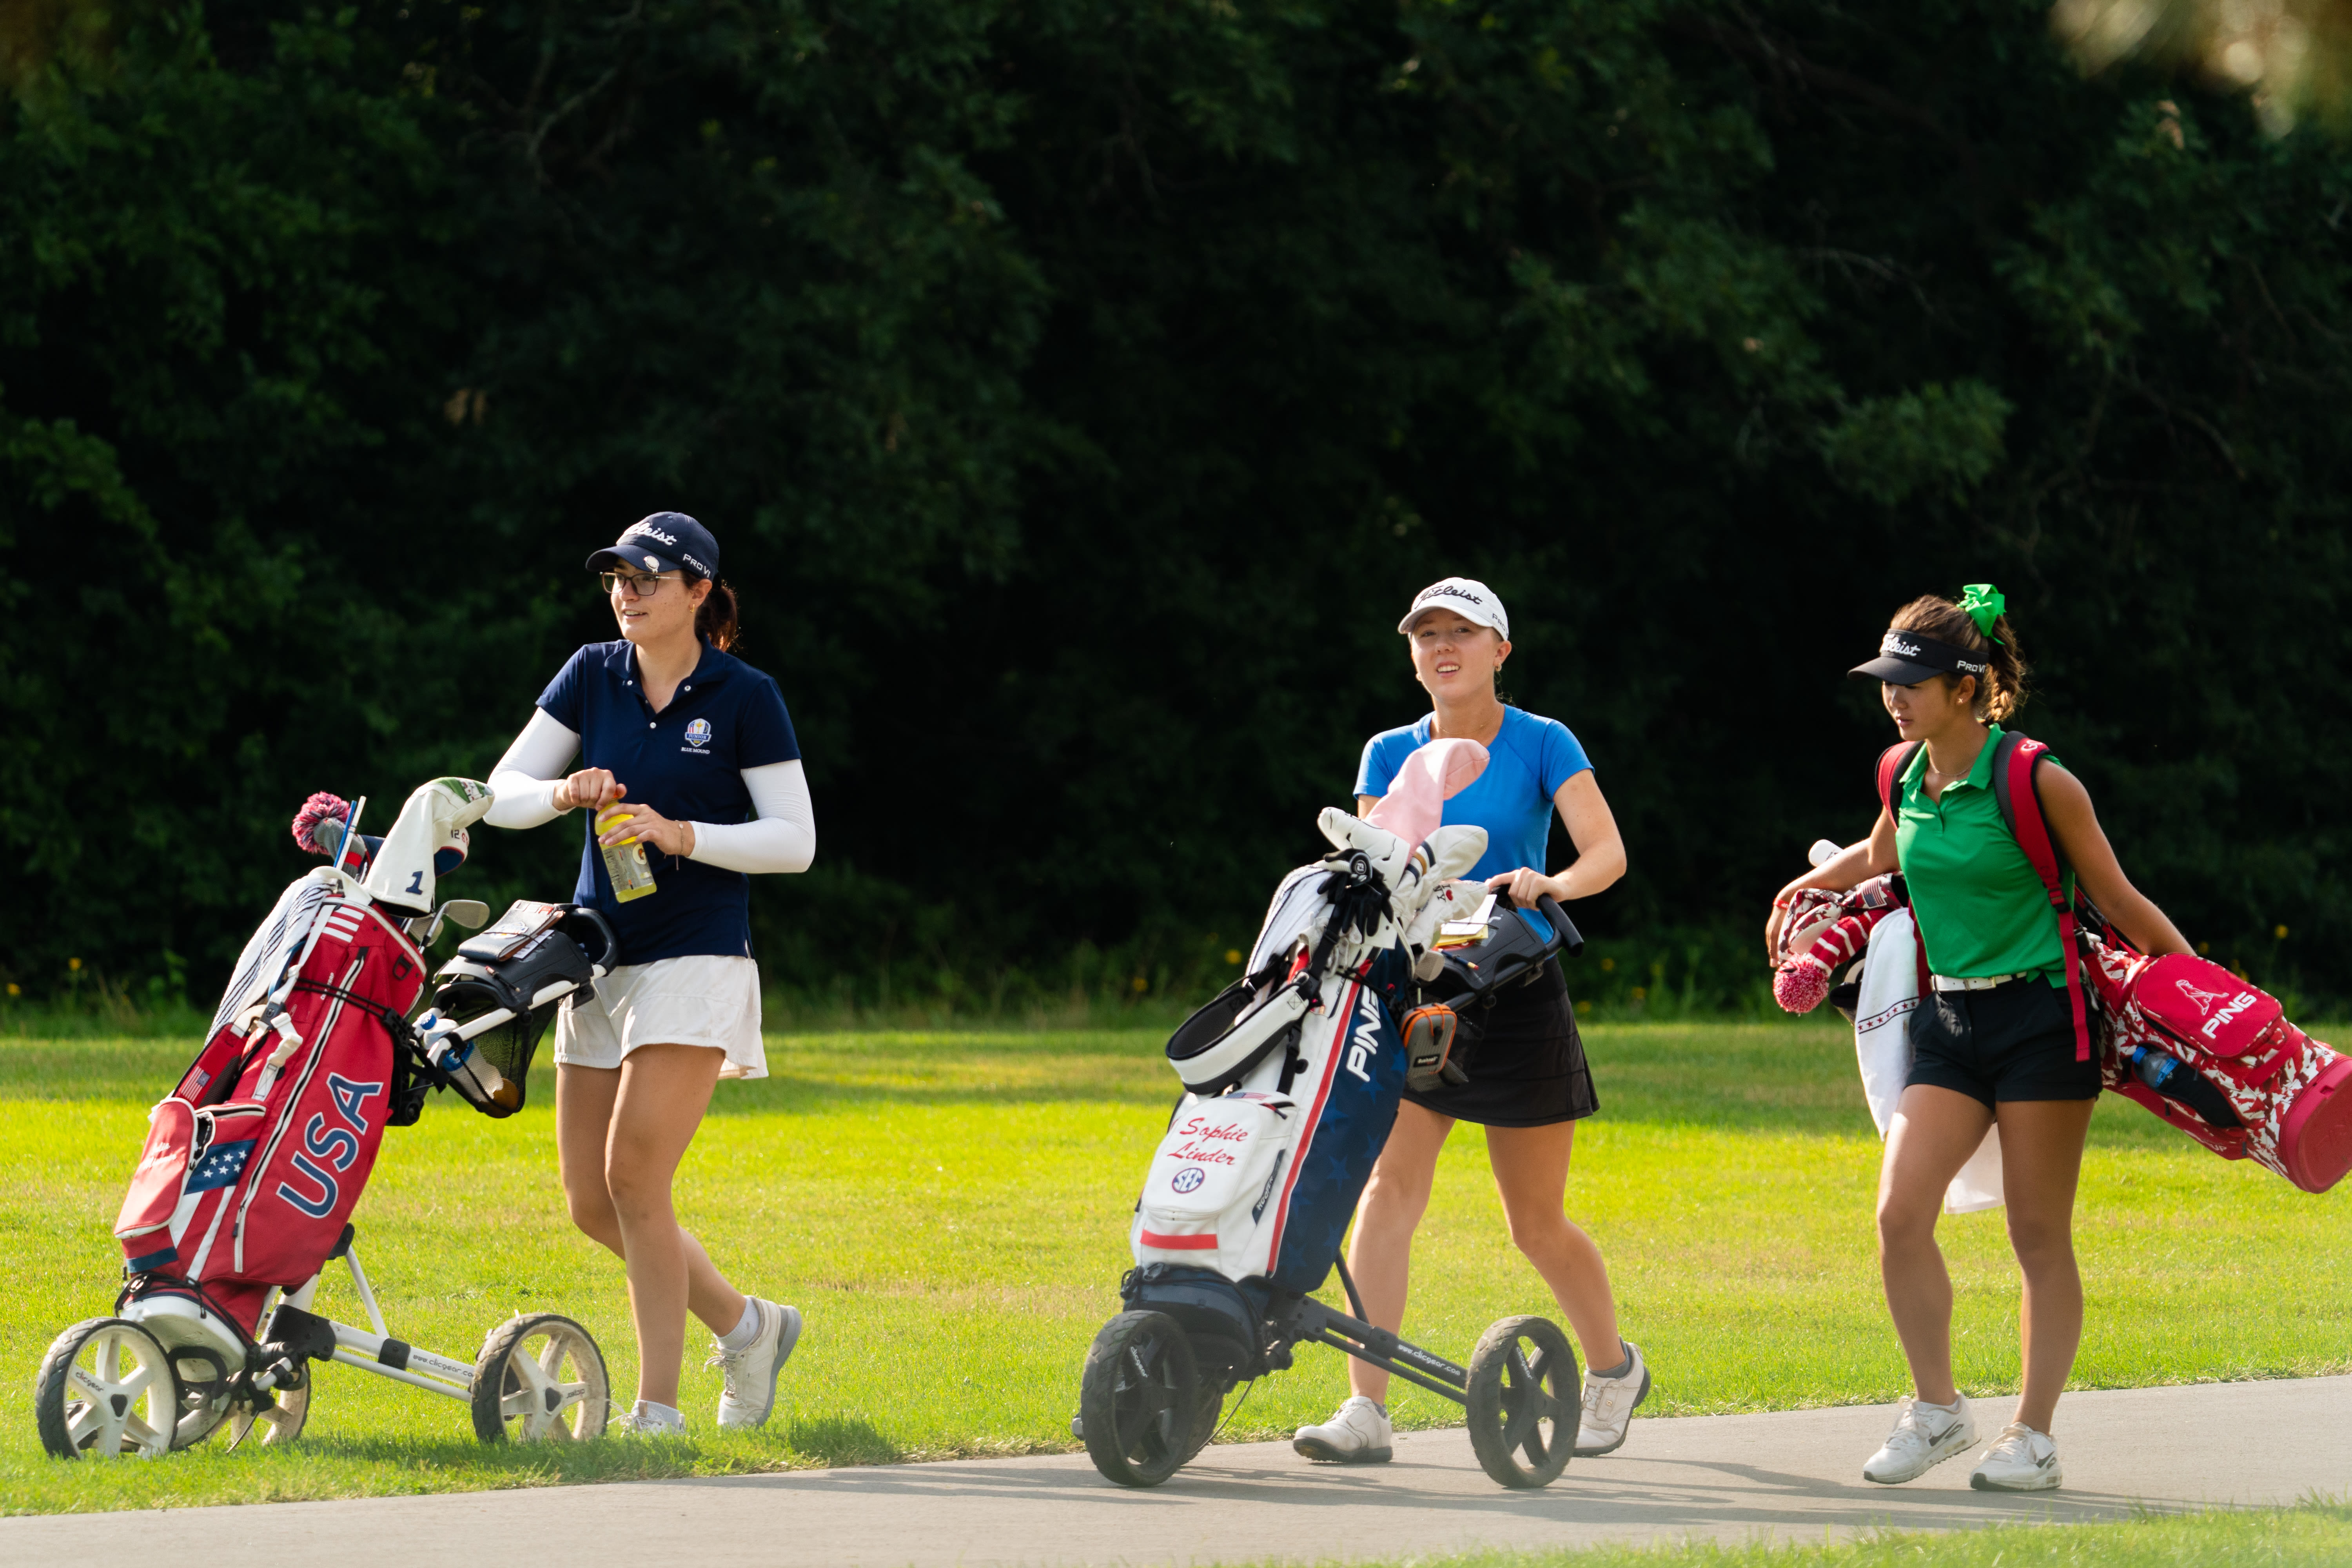 Julia Misemer, Sophie Linder and Leigh Chien walk toward the third fairway during the first round for the 46th Boys and Girls Junior PGA Championship held at Cog Hill Golf & Country Club on August 2, 2022 in Lemont, Illinois.